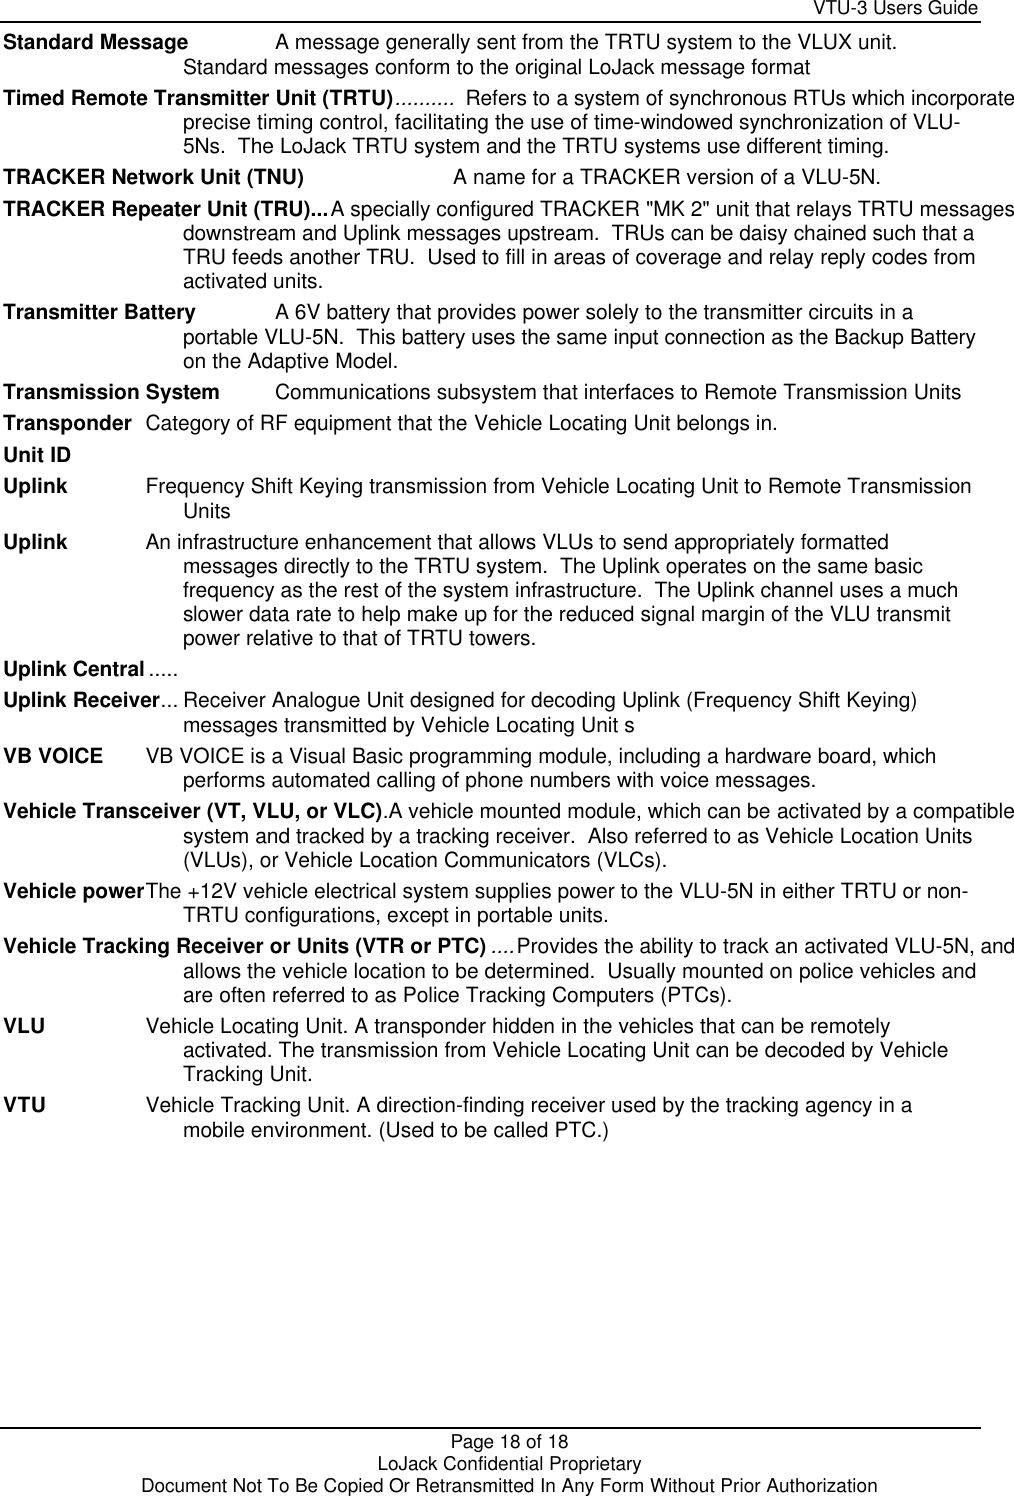     VTU-3 Users Guide  Page 18 of 18    LoJack Confidential Proprietary  Document Not To Be Copied Or Retransmitted In Any Form Without Prior Authorization Standard Message A message generally sent from the TRTU system to the VLUX unit.  Standard messages conform to the original LoJack message format Timed Remote Transmitter Unit (TRTU)..........  Refers to a system of synchronous RTUs which incorporate  precise timing control, facilitating the use of time-windowed synchronization of VLU-5Ns.  The LoJack TRTU system and the TRTU systems use different timing. TRACKER Network Unit (TNU) A name for a TRACKER version of a VLU-5N. TRACKER Repeater Unit (TRU)...A specially configured TRACKER &quot;MK 2&quot; unit that relays TRTU messages  downstream and Uplink messages upstream.  TRUs can be daisy chained such that a TRU feeds another TRU.  Used to fill in areas of coverage and relay reply codes from activated units. Transmitter Battery A 6V battery that provides power solely to the transmitter circuits in a portable VLU-5N.  This battery uses the same input connection as the Backup Battery on the Adaptive Model. Transmission System Communications subsystem that interfaces to Remote Transmission Units Transponder Category of RF equipment that the Vehicle Locating Unit belongs in. Unit ID  Uplink Frequency Shift Keying transmission from Vehicle Locating Unit to Remote Transmission Units Uplink An infrastructure enhancement that allows VLUs to send appropriately formatted messages directly to the TRTU system.  The Uplink operates on the same basic frequency as the rest of the system infrastructure.  The Uplink channel uses a much slower data rate to help make up for the reduced signal margin of the VLU transmit power relative to that of TRTU towers. Uplink Central .....  Uplink Receiver... Receiver Analogue Unit designed for decoding Uplink (Frequency Shift Keying) messages transmitted by Vehicle Locating Unit s VB VOICE VB VOICE is a Visual Basic programming module, including a hardware board, which performs automated calling of phone numbers with voice messages.   Vehicle Transceiver (VT, VLU, or VLC).A vehicle mounted module, which can be activated by a compatible  system and tracked by a tracking receiver.  Also referred to as Vehicle Location Units (VLUs), or Vehicle Location Communicators (VLCs). Vehicle power The +12V vehicle electrical system supplies power to the VLU-5N in either TRTU or non-TRTU configurations, except in portable units. Vehicle Tracking Receiver or Units (VTR or PTC) ....Provides the ability to track an activated VLU-5N, and  allows the vehicle location to be determined.  Usually mounted on police vehicles and are often referred to as Police Tracking Computers (PTCs). VLU Vehicle Locating Unit. A transponder hidden in the vehicles that can be remotely activated. The transmission from Vehicle Locating Unit can be decoded by Vehicle Tracking Unit. VTU Vehicle Tracking Unit. A direction-finding receiver used by the tracking agency in a mobile environment. (Used to be called PTC.)    